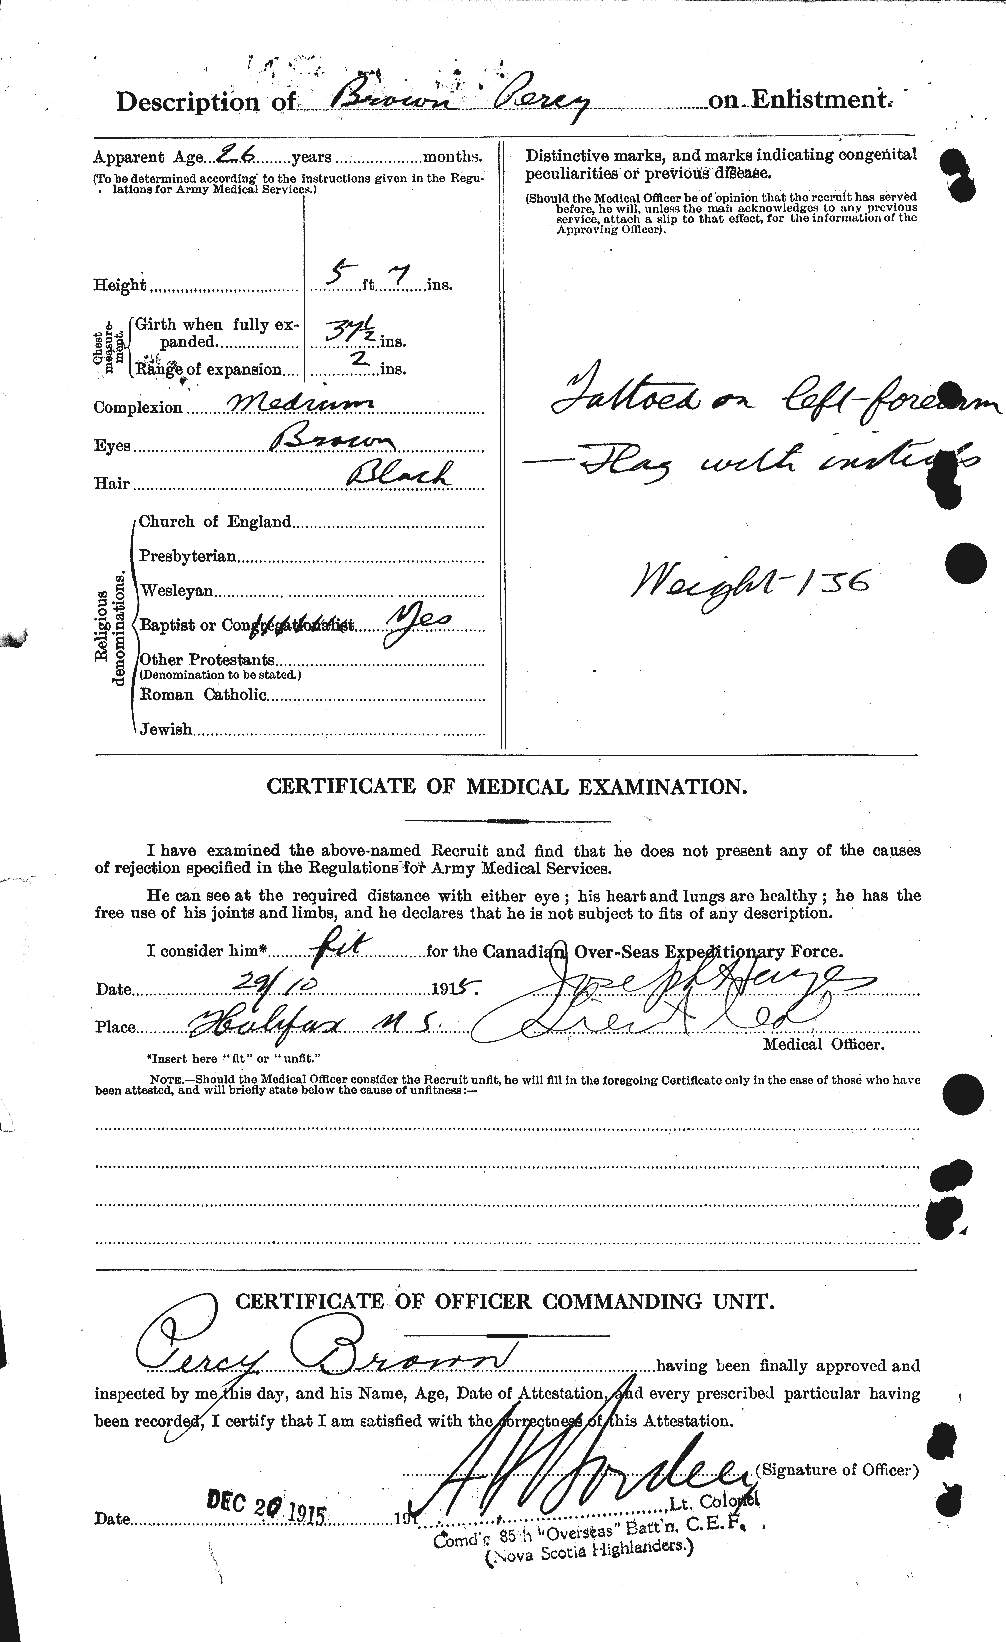 Personnel Records of the First World War - CEF 267168b